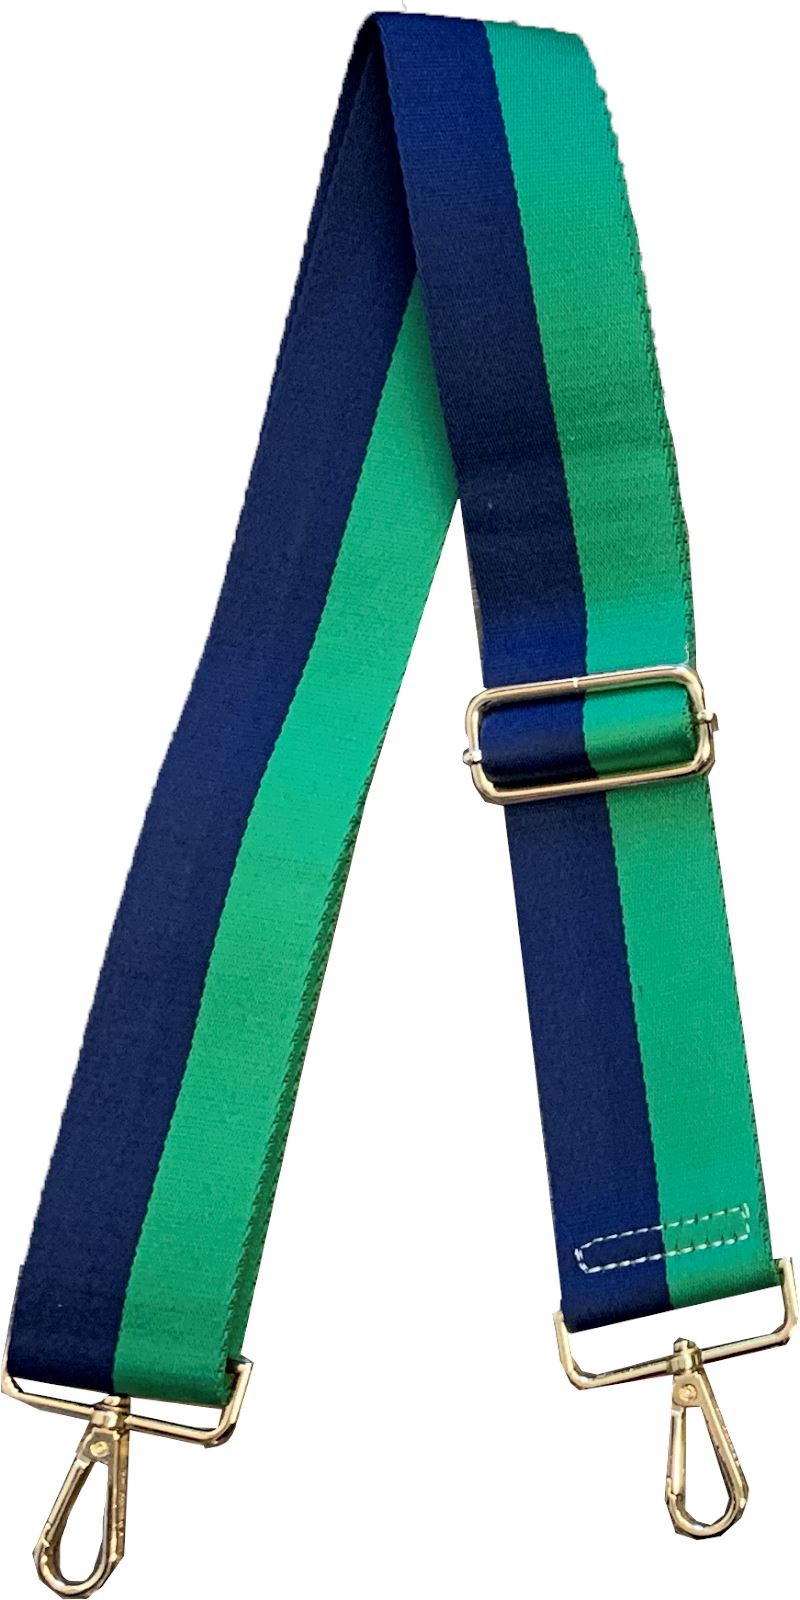 Game Day Color Block Guitar Straps — The Horseshoe Crab